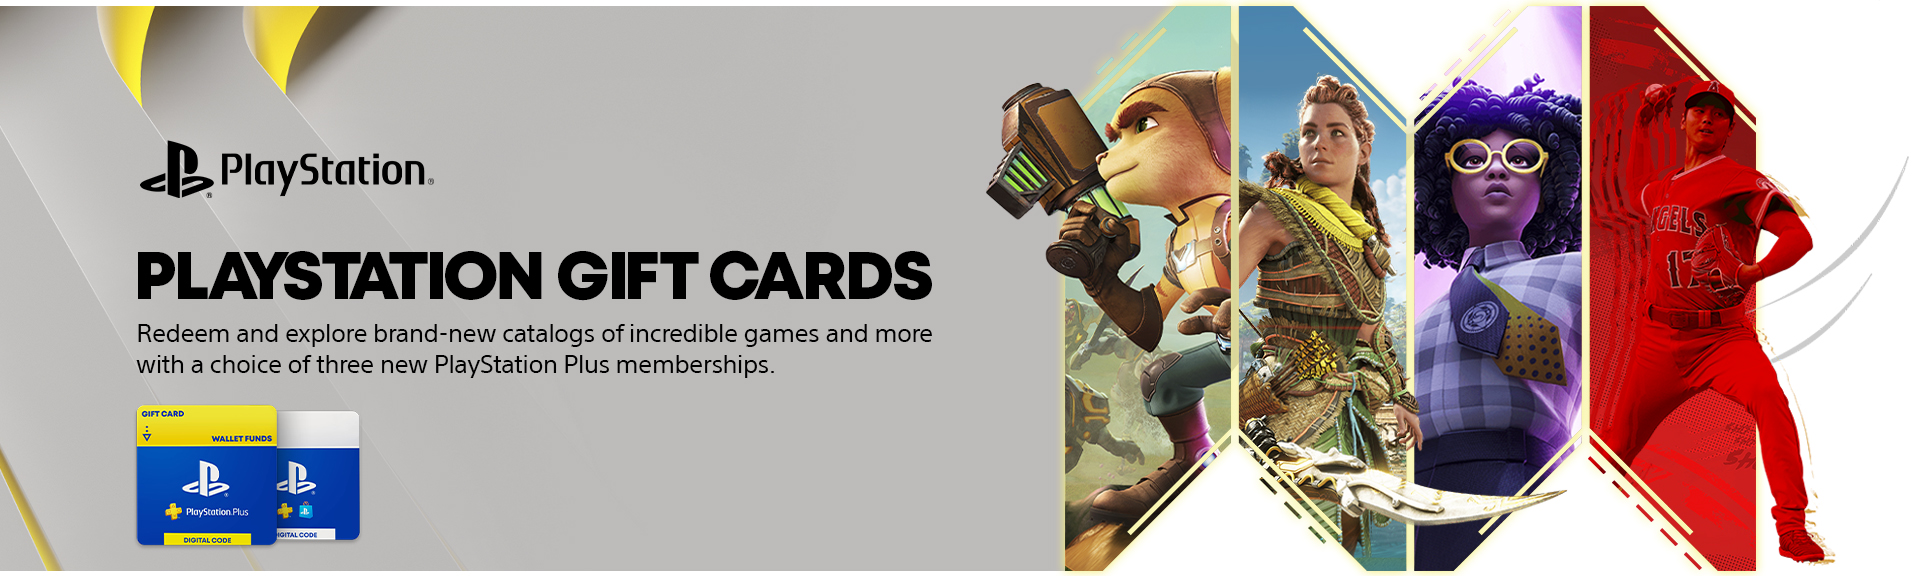 Sony Playstation Giftcards LP 07.14.banner